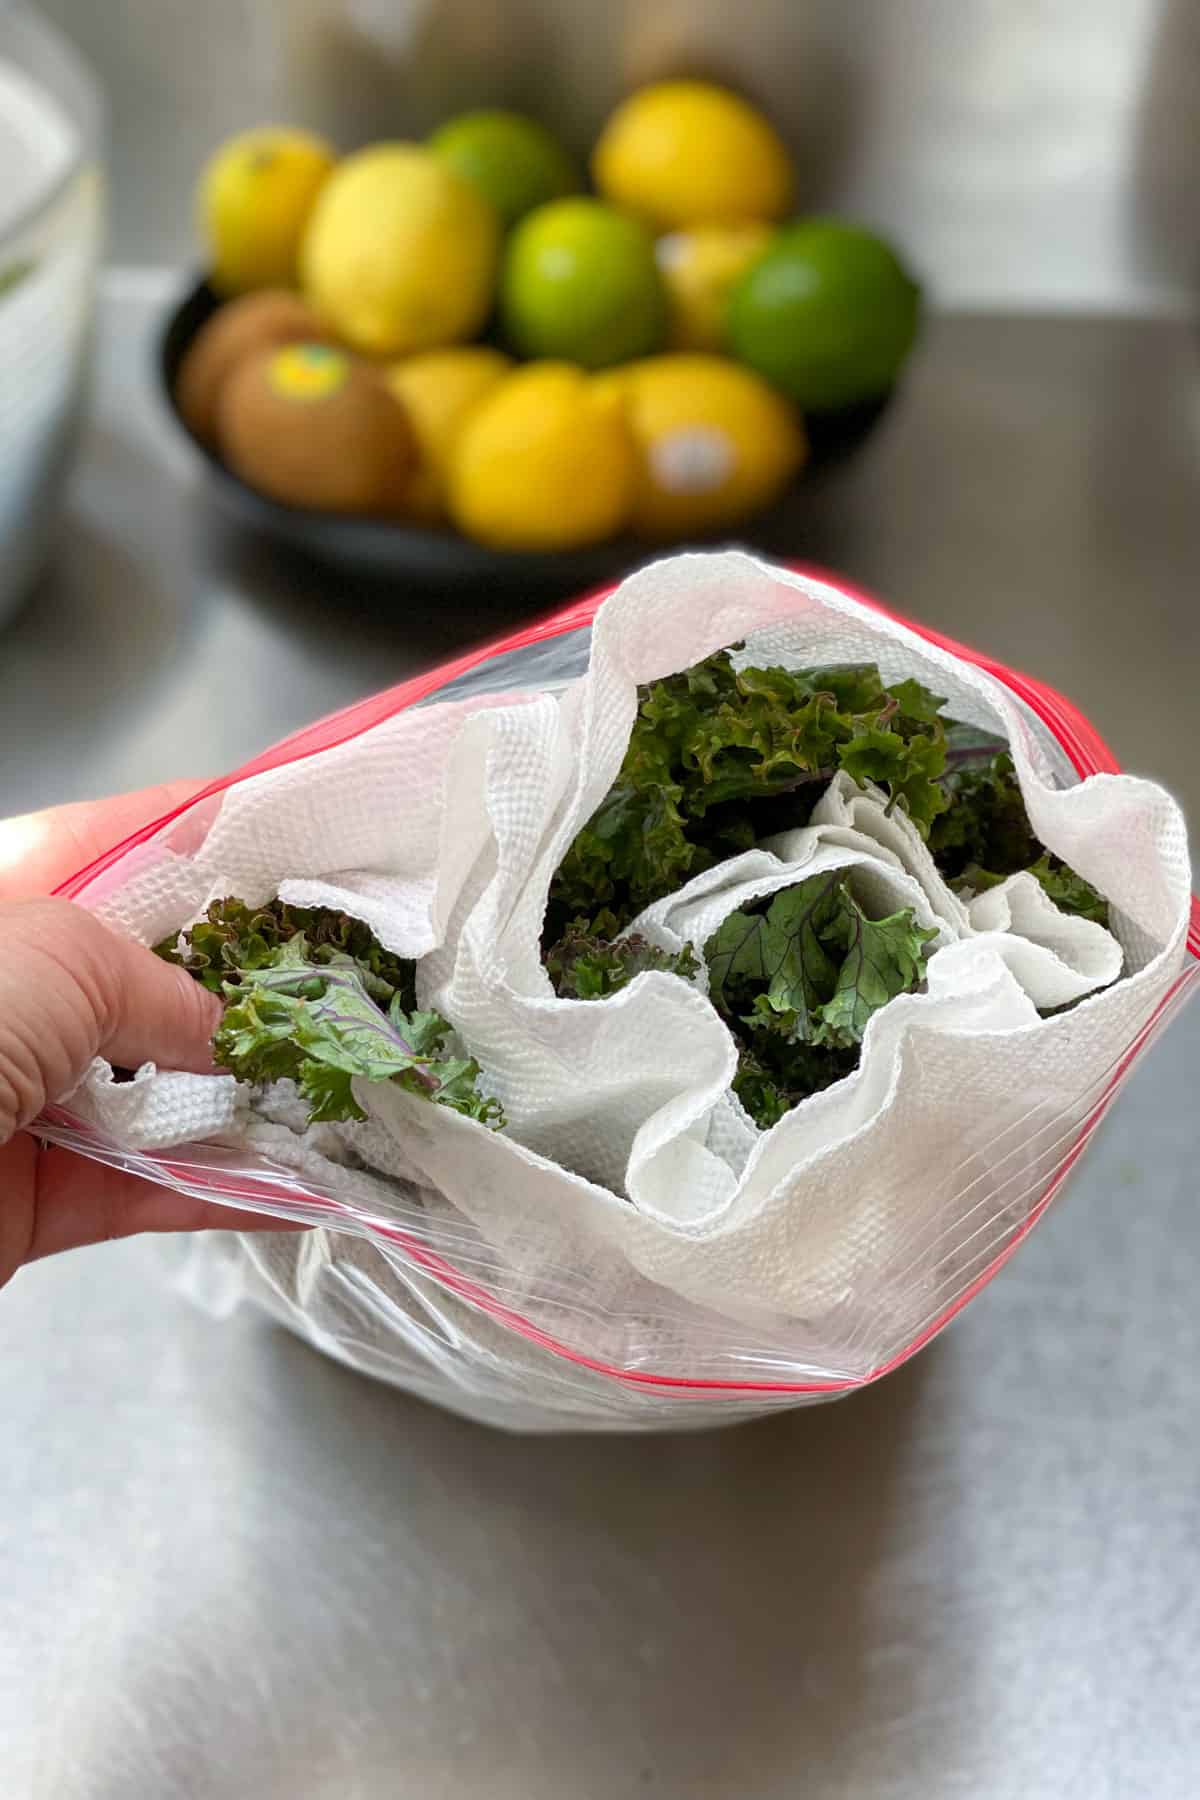 a roll of kale leaves inside a plastic ziplock bag with a bowl of lemons and limes in the background